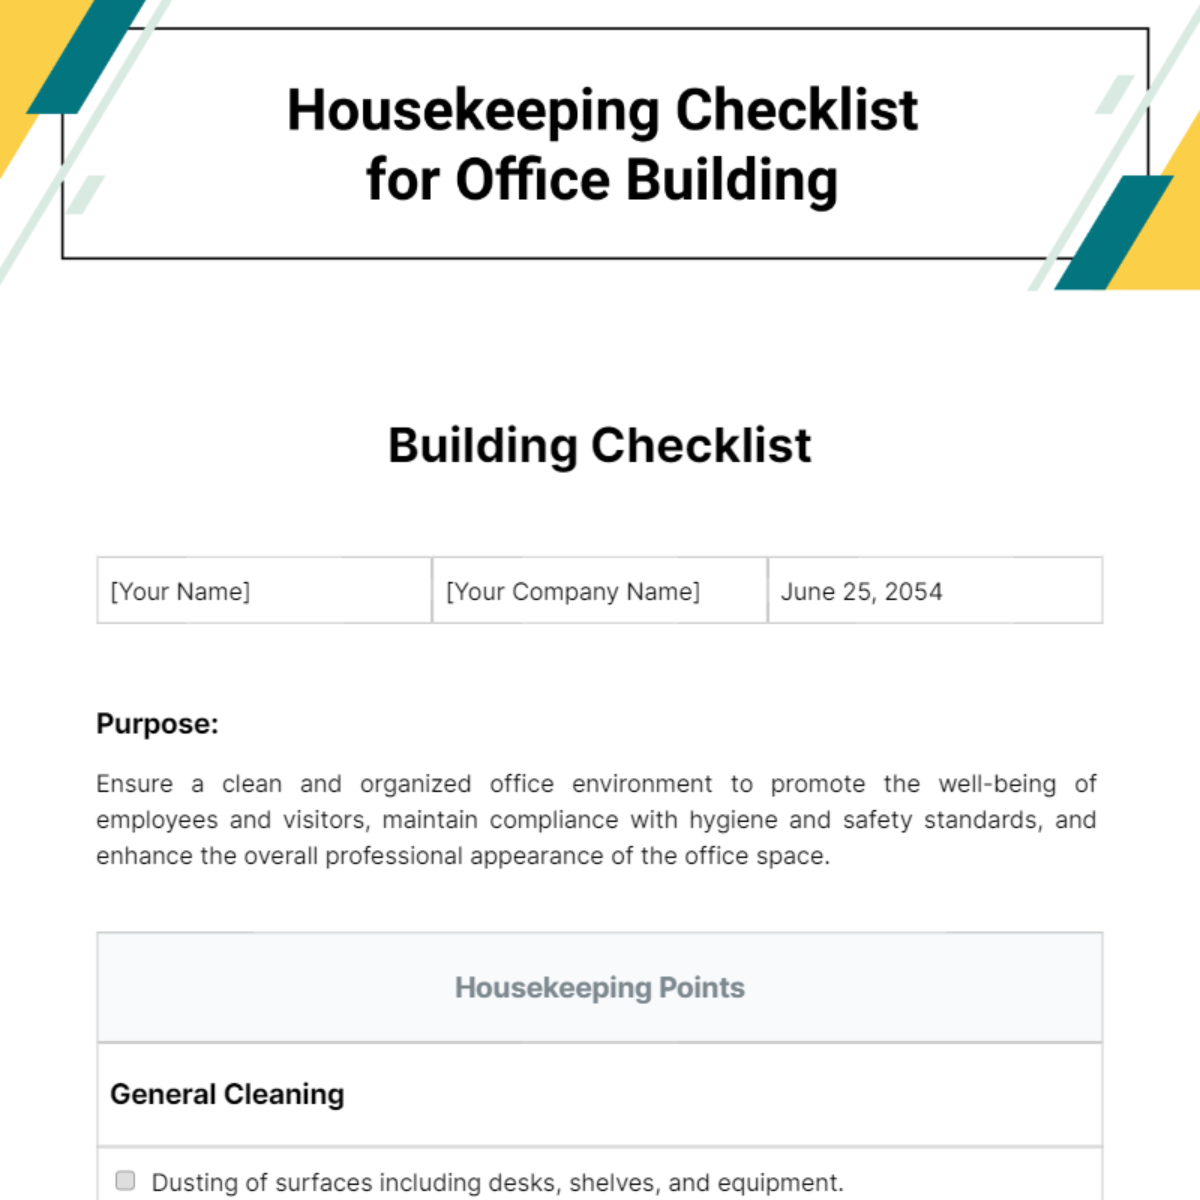 Housekeeping Checklist for Office Building Template